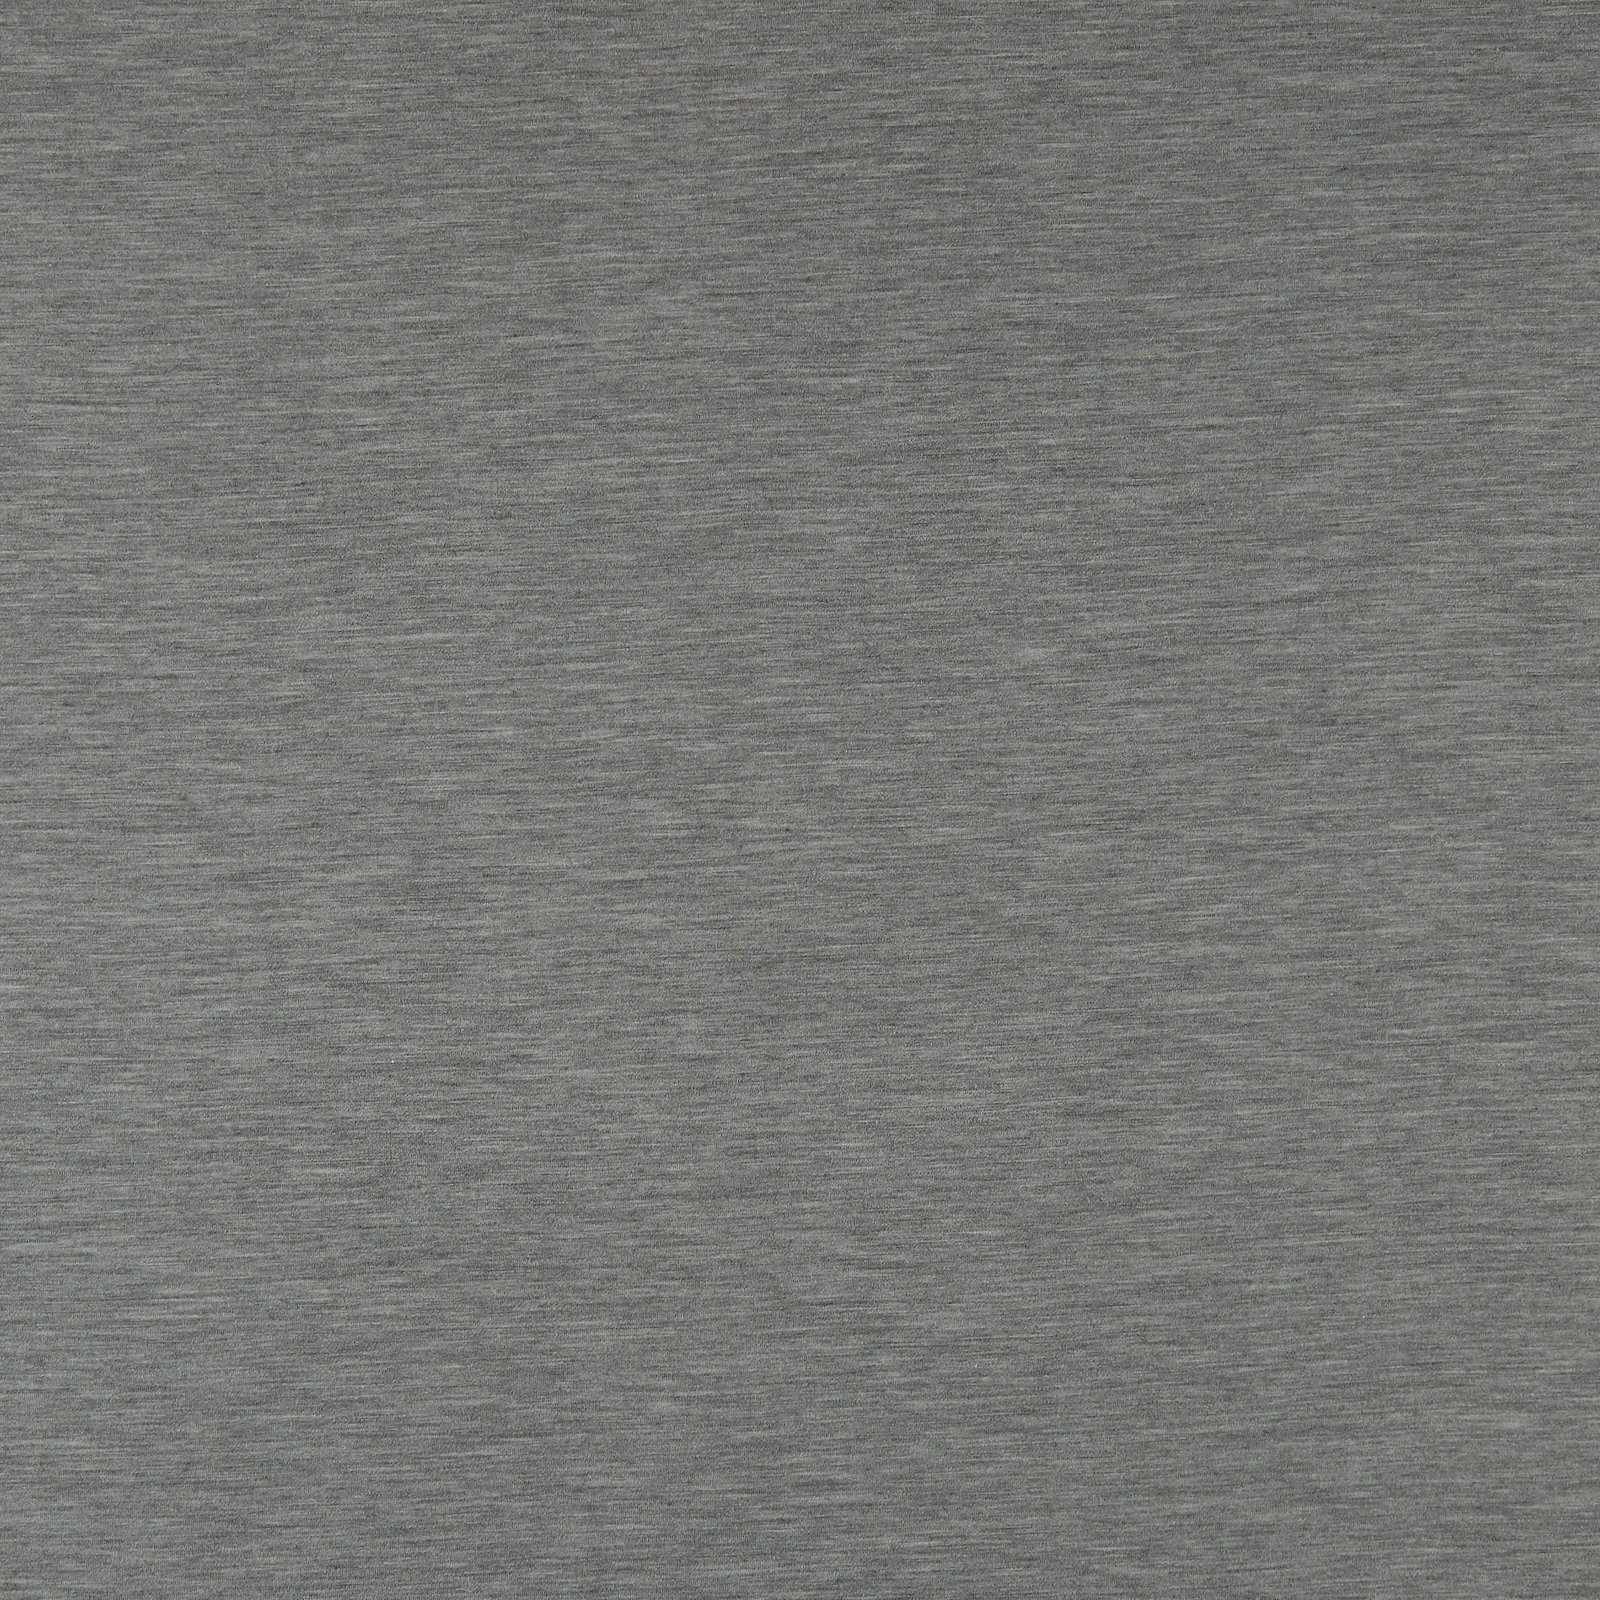 Wool/acr jersey grey mel/white 2-sided 273561_pack_solid